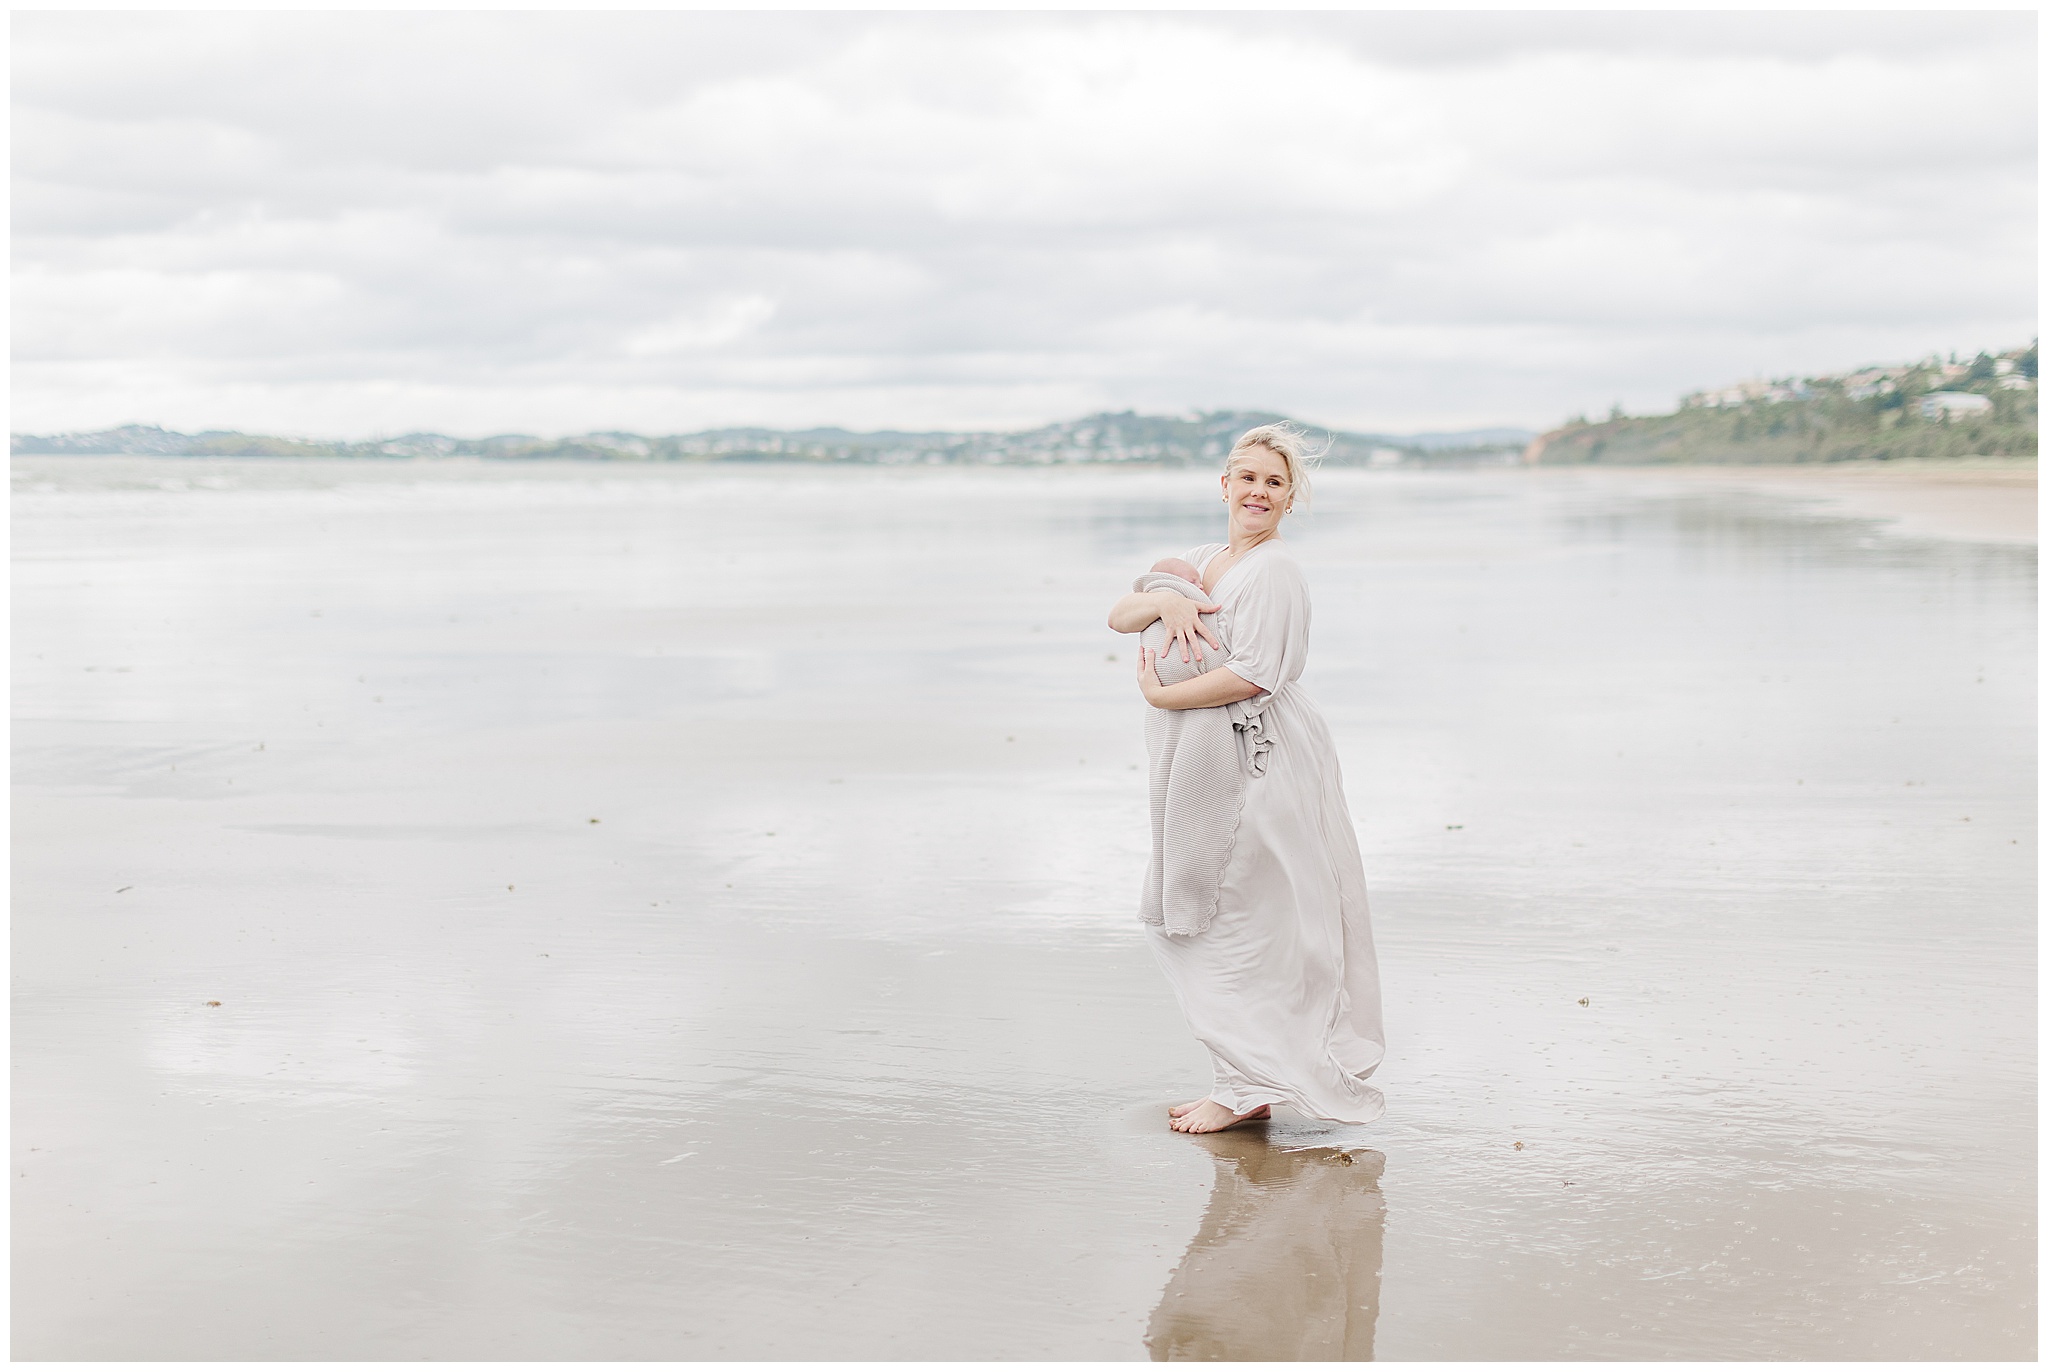 Mum and her new baby on Yeppon beach by alyce holzy photography